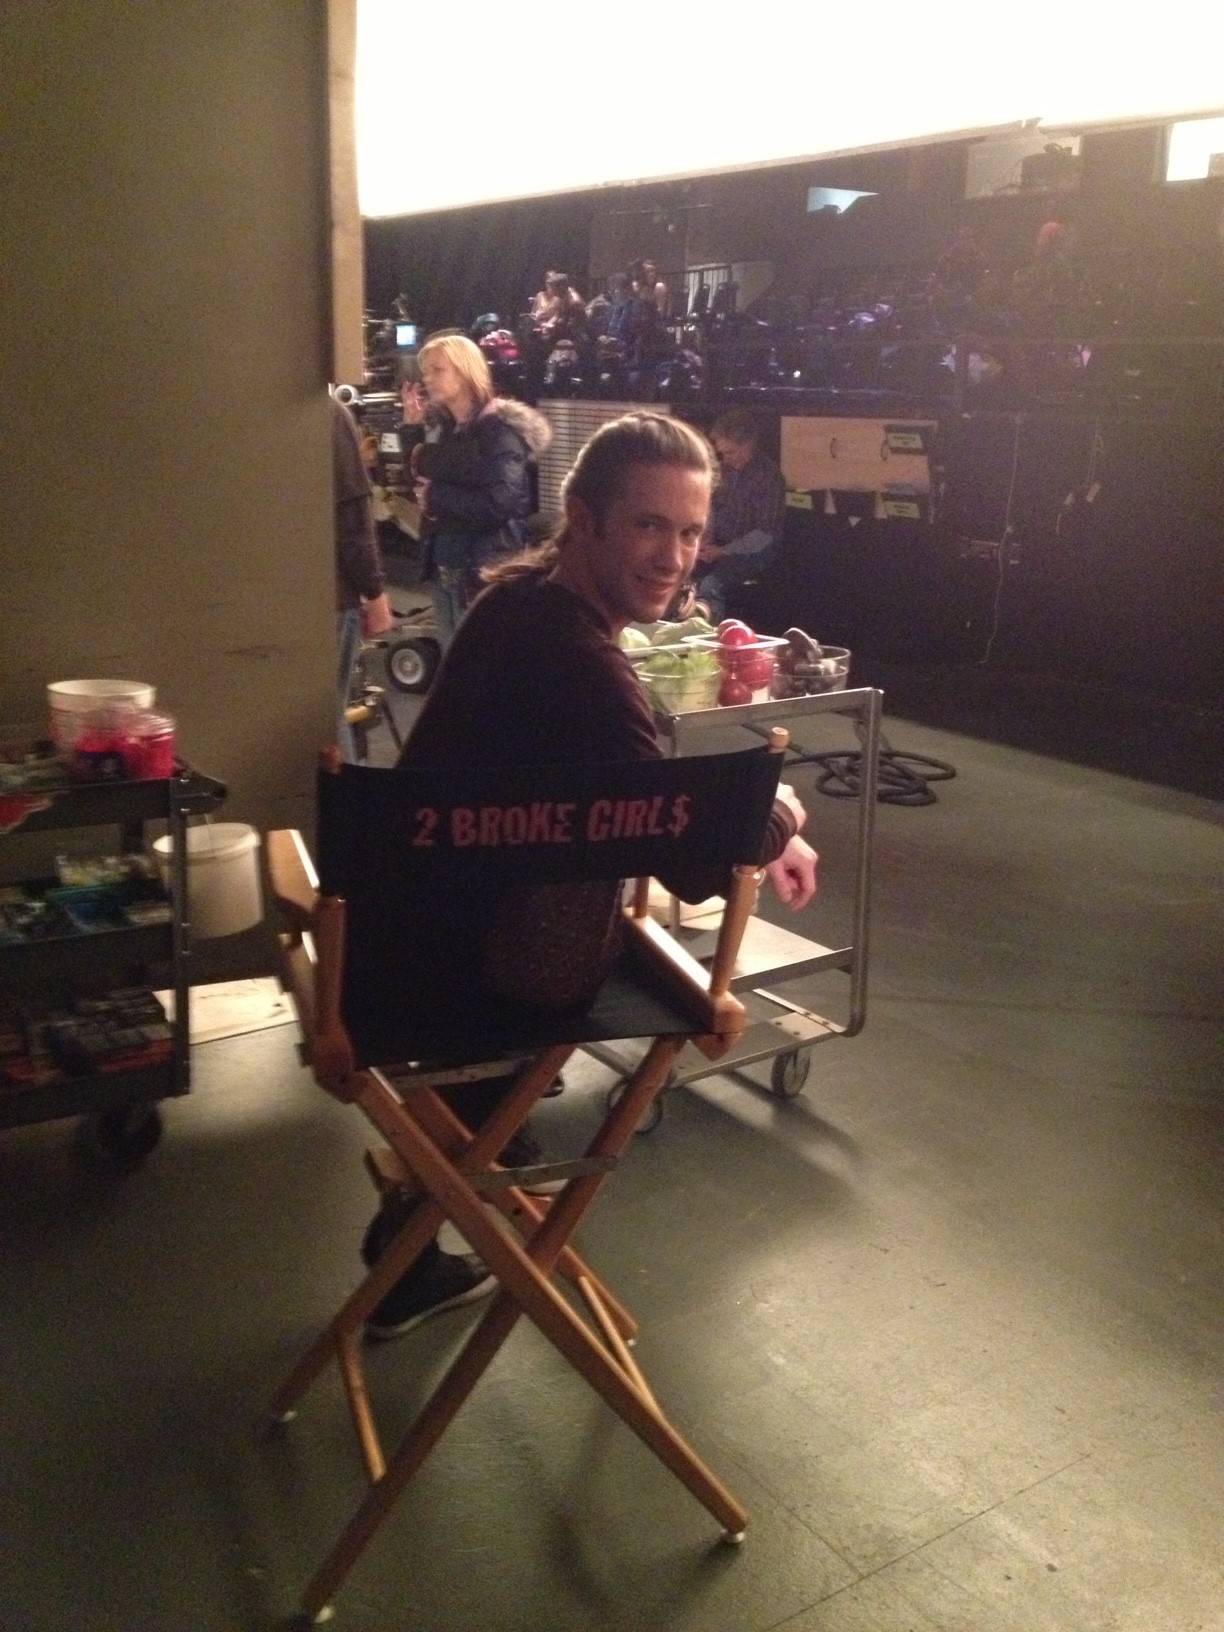 On Set 2 Broke Girls. Just chillin out the way until my scene. :)